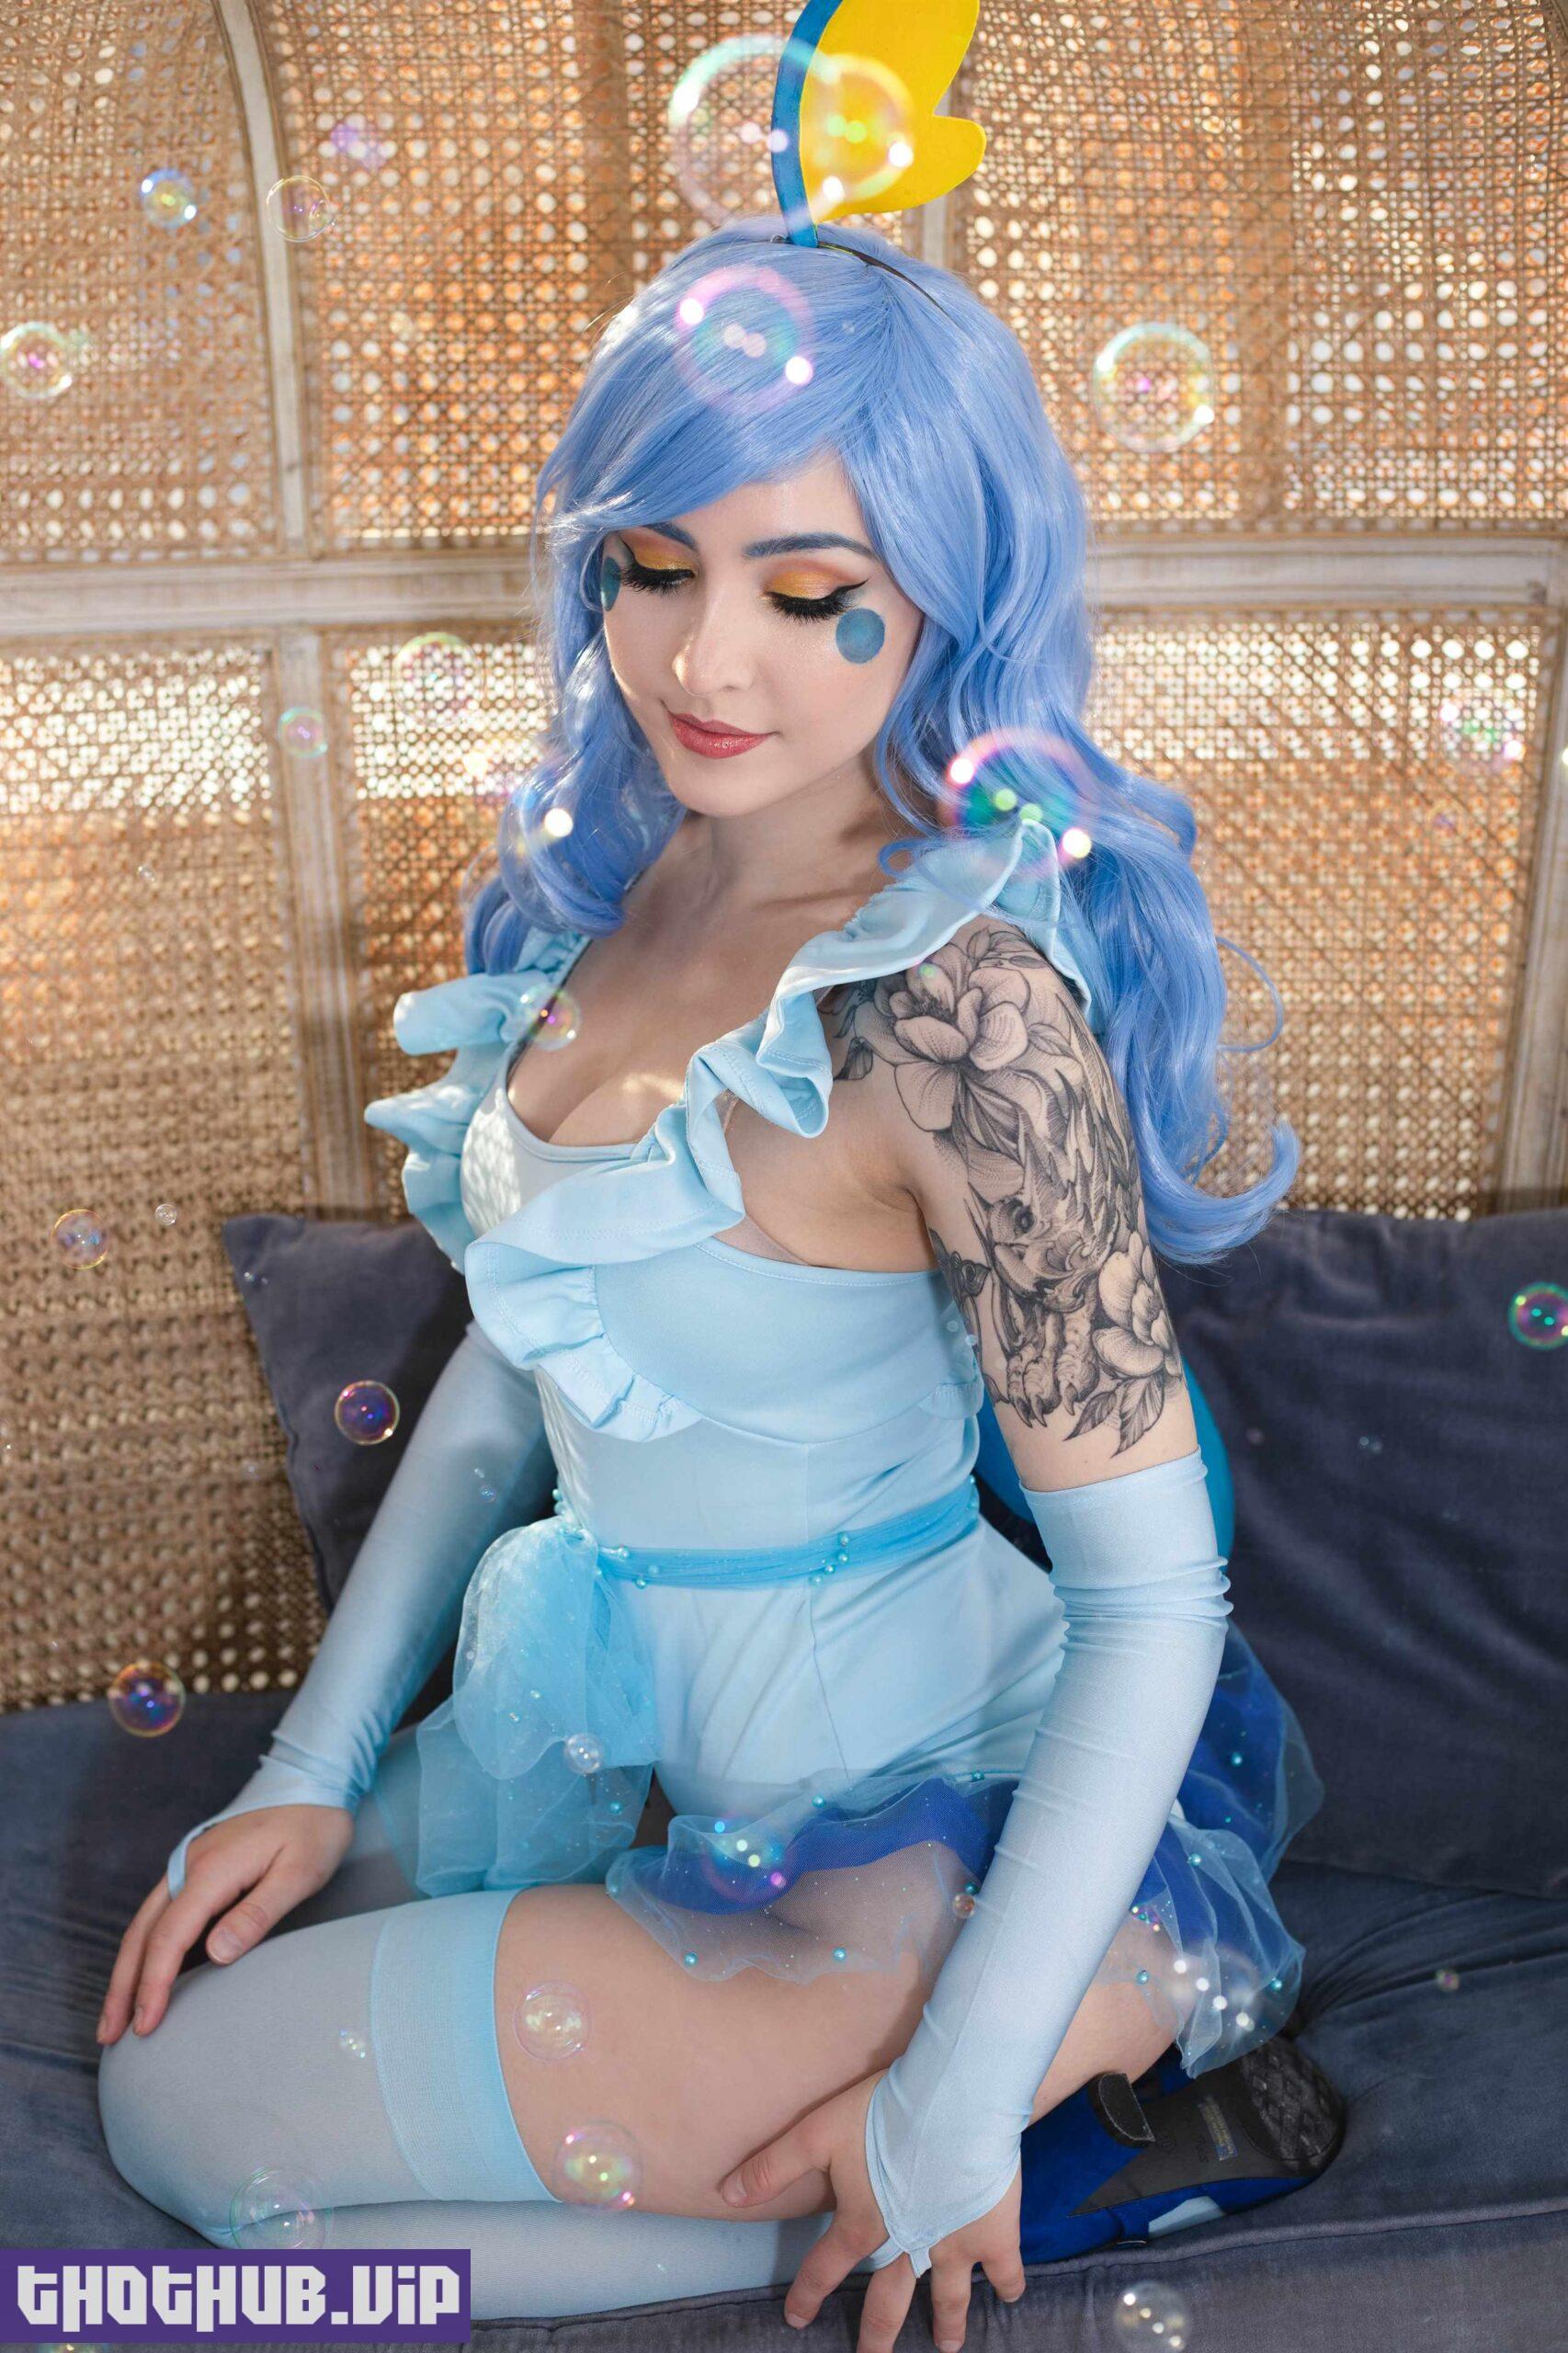 1649955967 268 Luxlo Cosplay Sobble 20 scaled